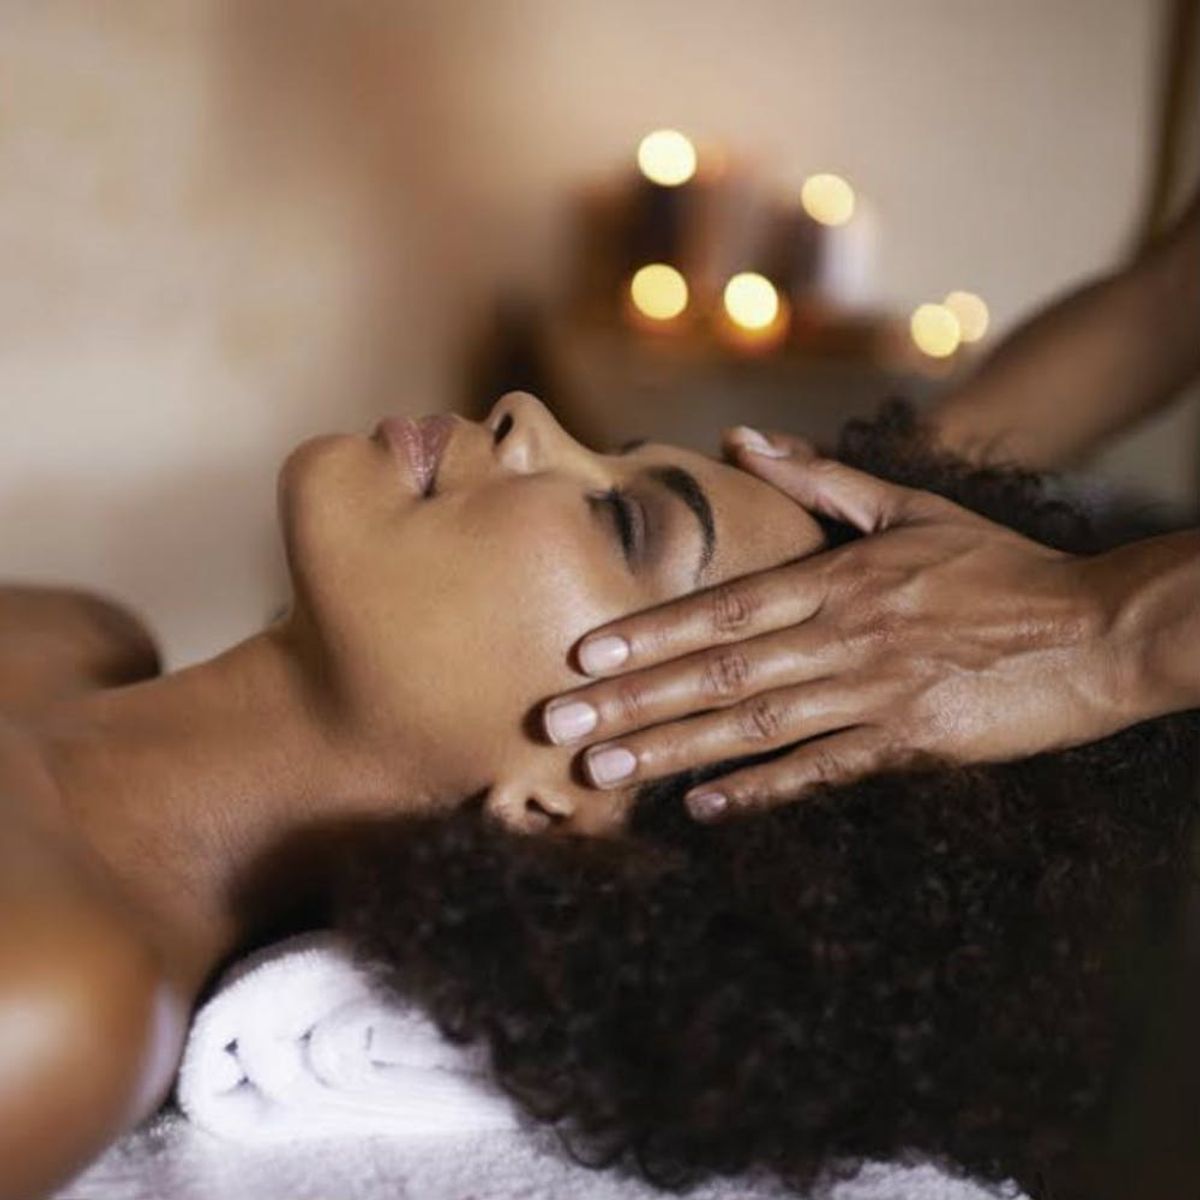 5 Healthy Reasons You Should Treat Yourself to a Monthly Massage